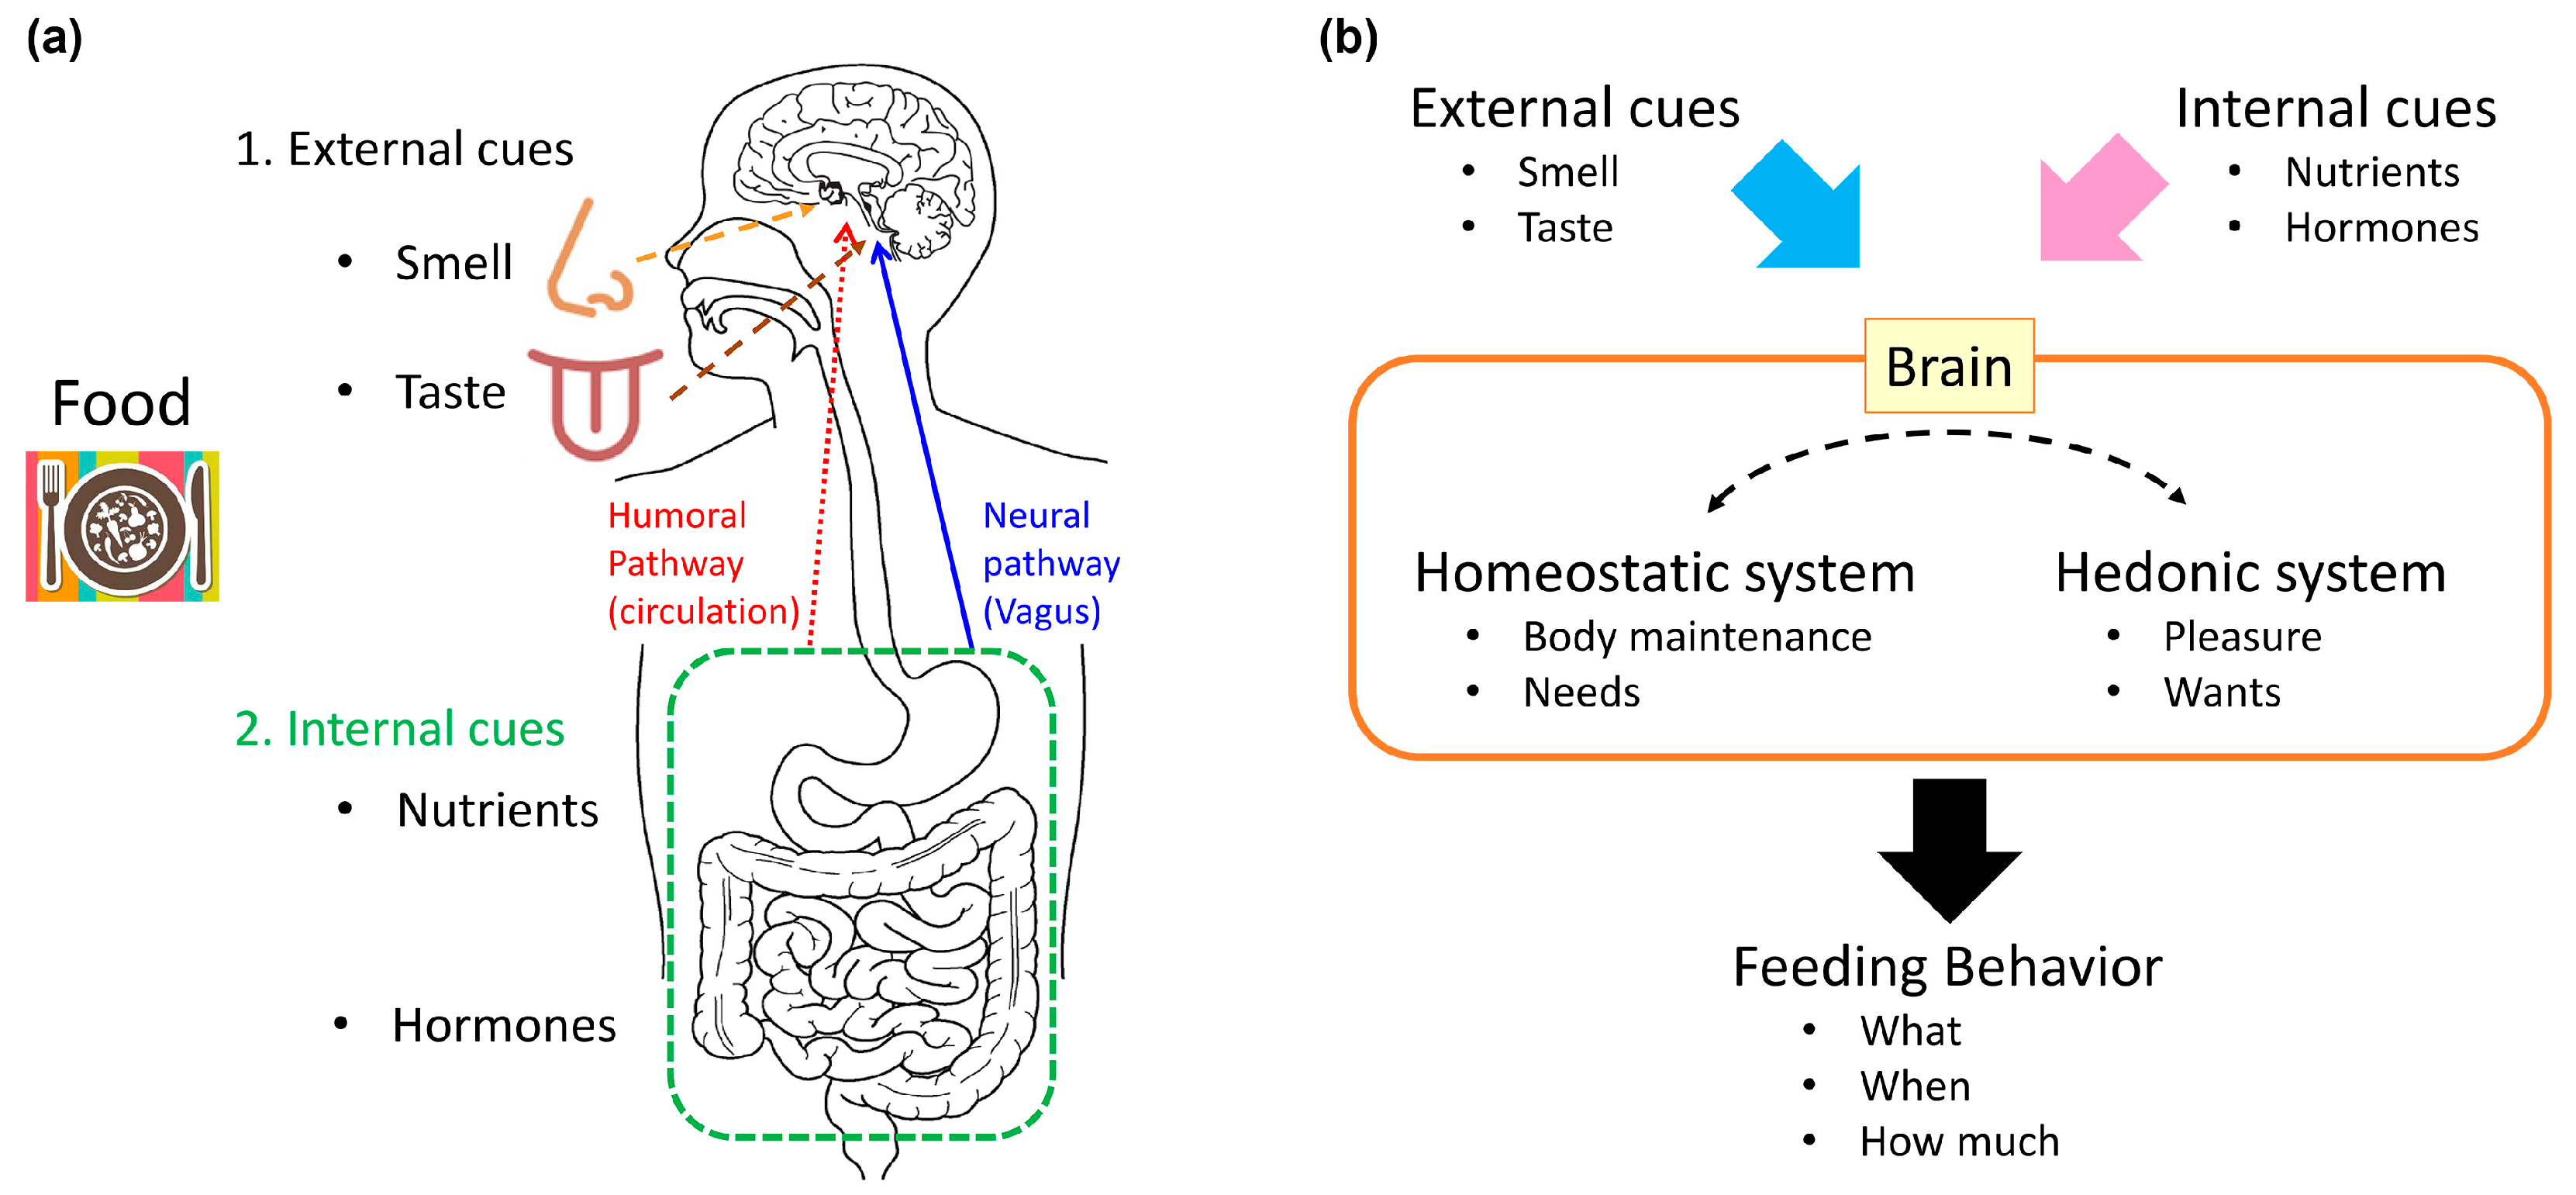 Appetitive ingestive behavior was measured over the estrous cycle in